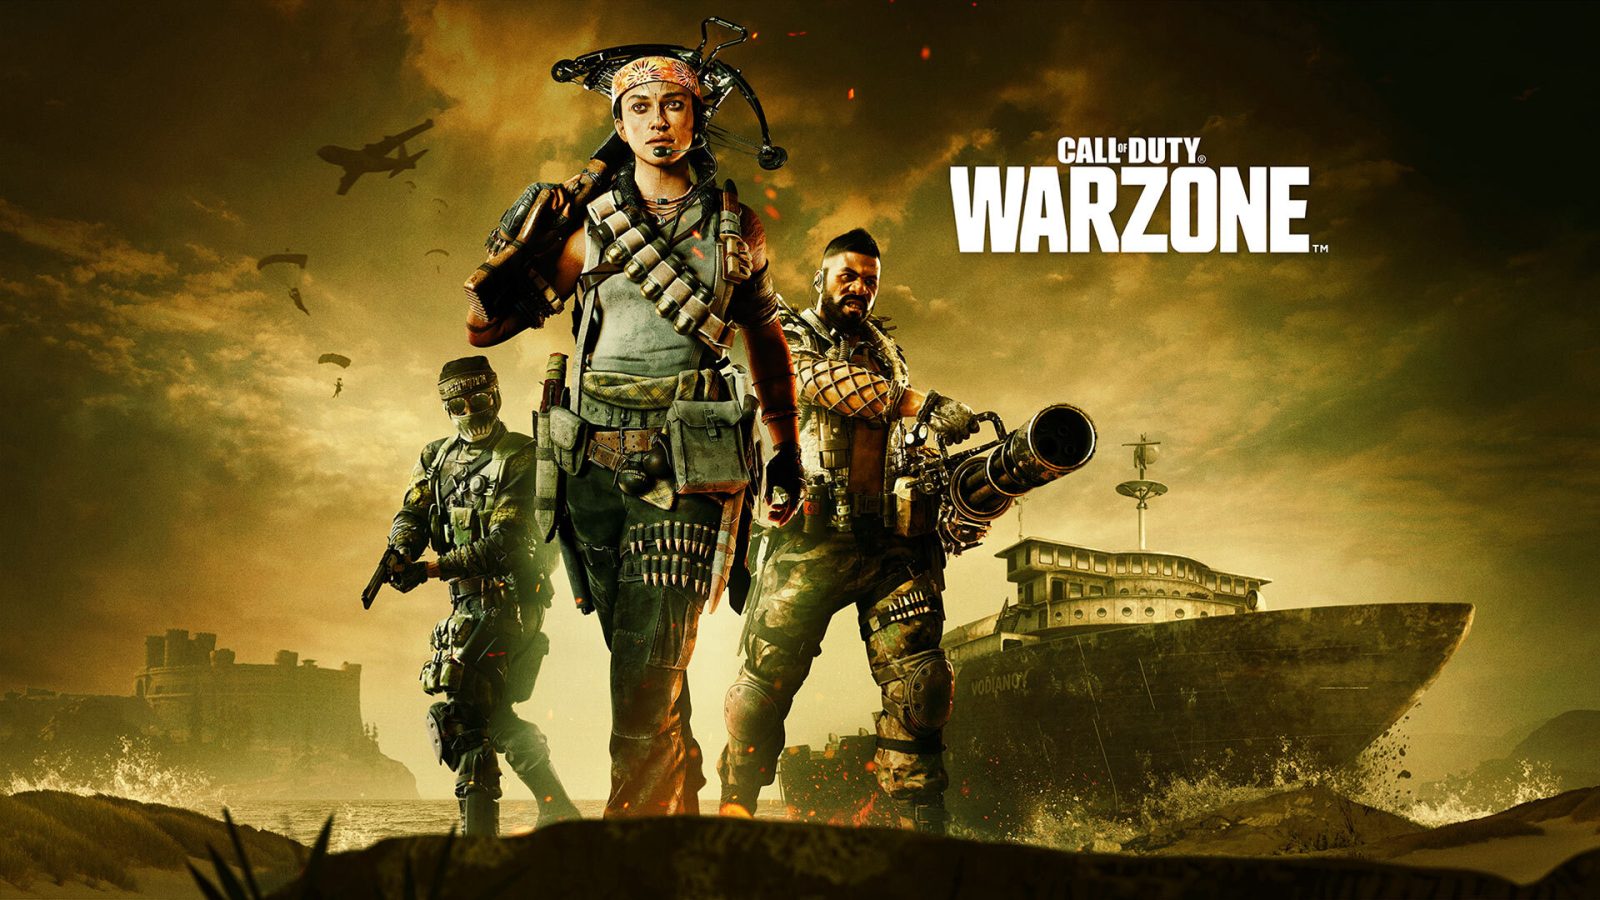 Call Of Duty: Warzone